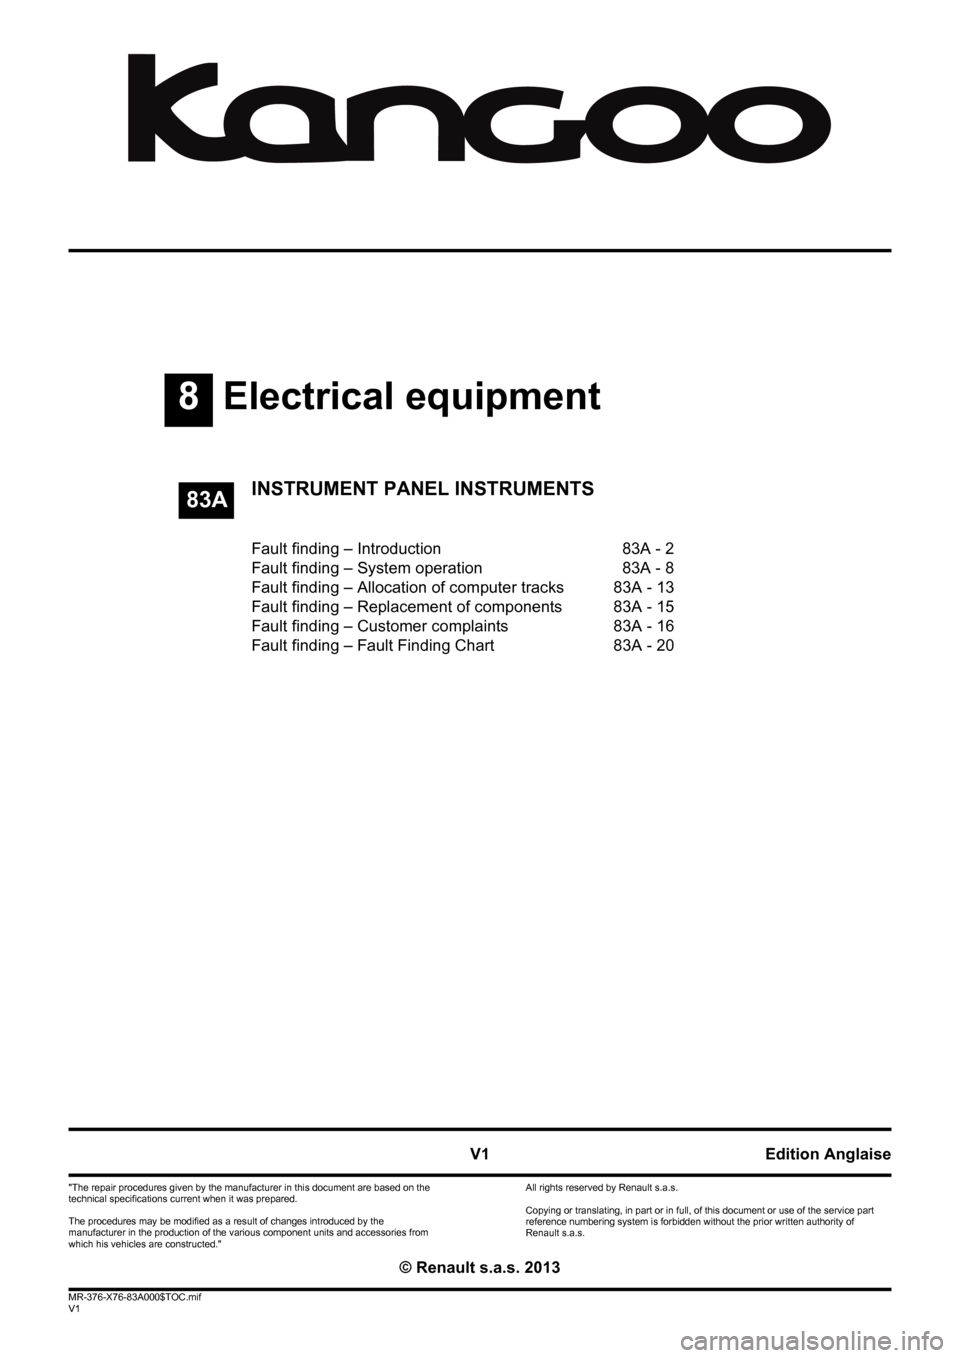 RENAULT KANGOO 2013 X61 / 2.G Instrument Panel Instruments Workshop Manual 8Electrical equipment
V1 MR-376-X76-83A000$TOC.mif
V1
83A
"The repair procedures given by the manufacturer in this document are based on the 
technical specifications current when it was prepared.
The